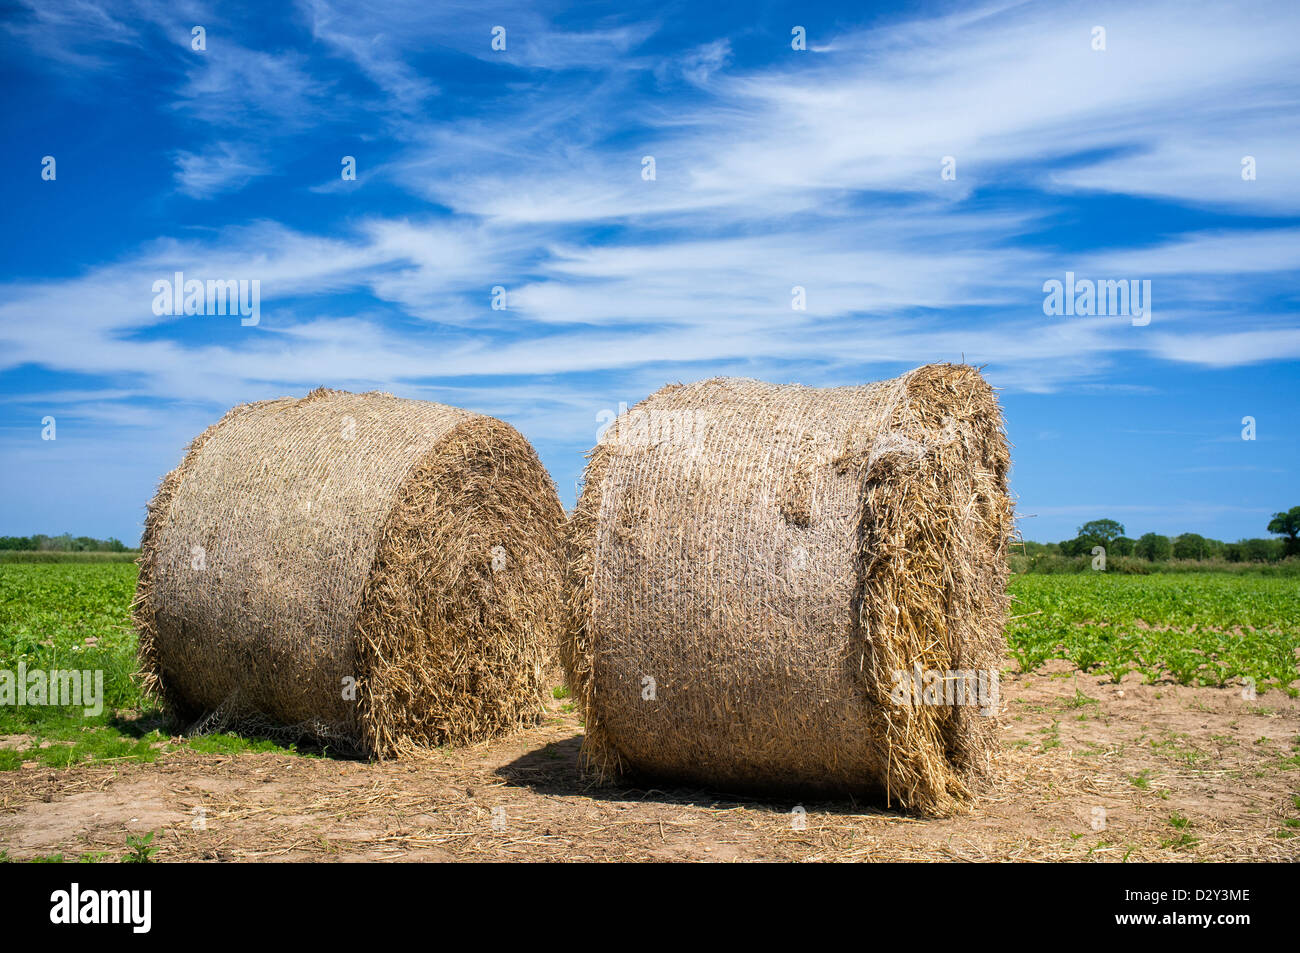 Circular Straw Bales in Field with Wispy Cirrus Cloud in a Blue Summer Sky Stock Photo